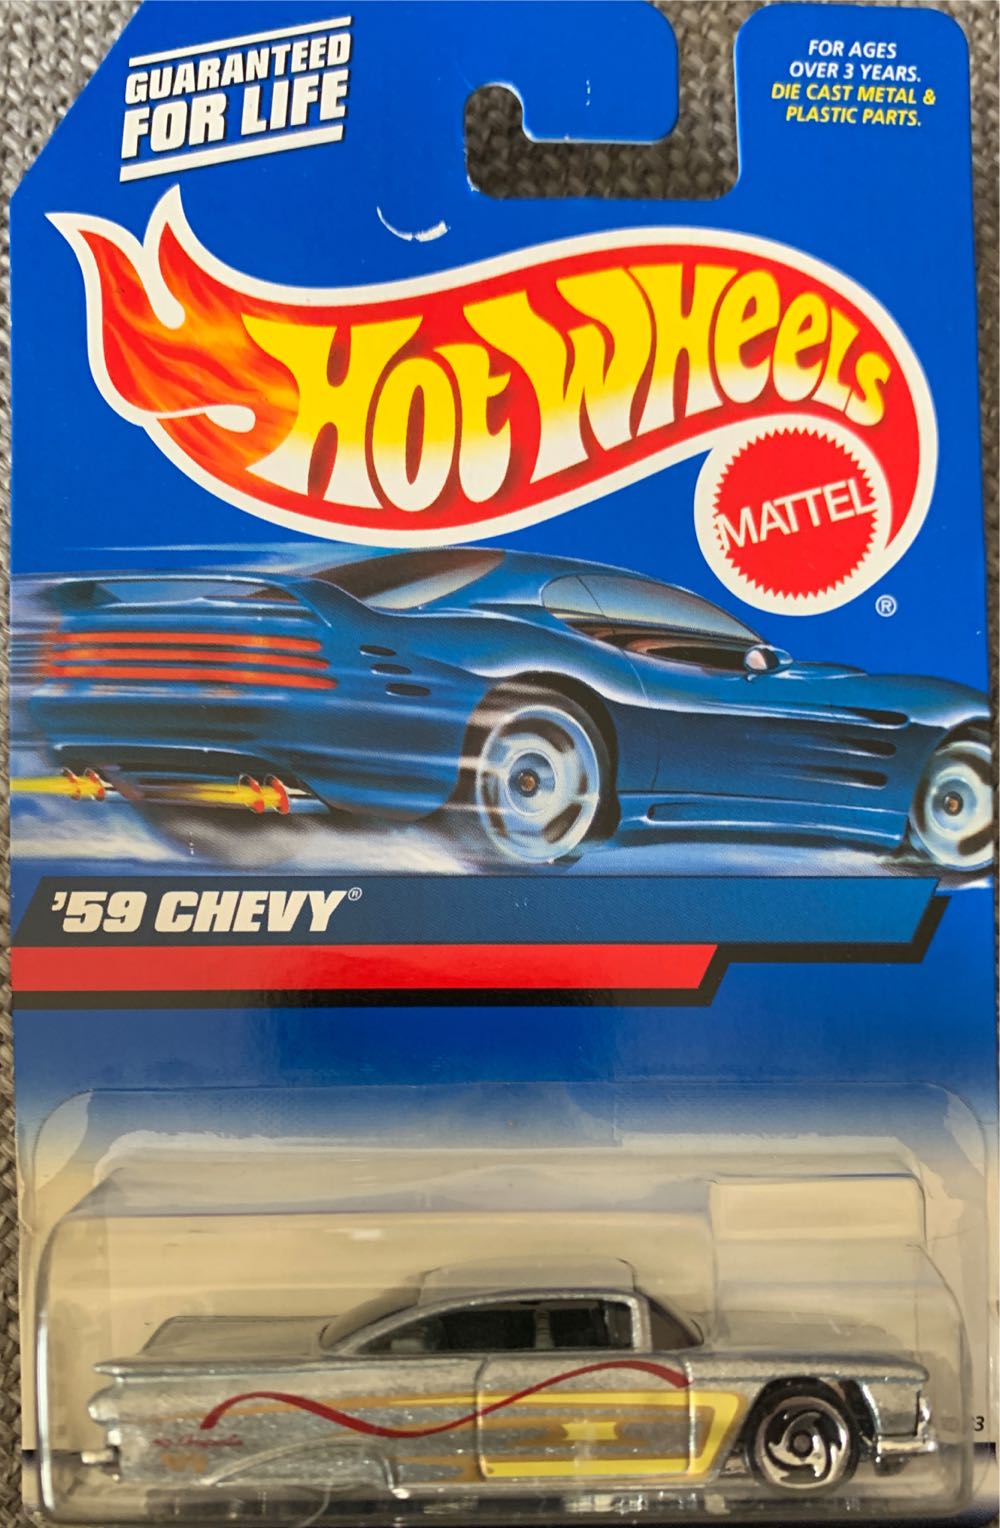 ‘59 Chevy Impala  toy car collectible - Main Image 2